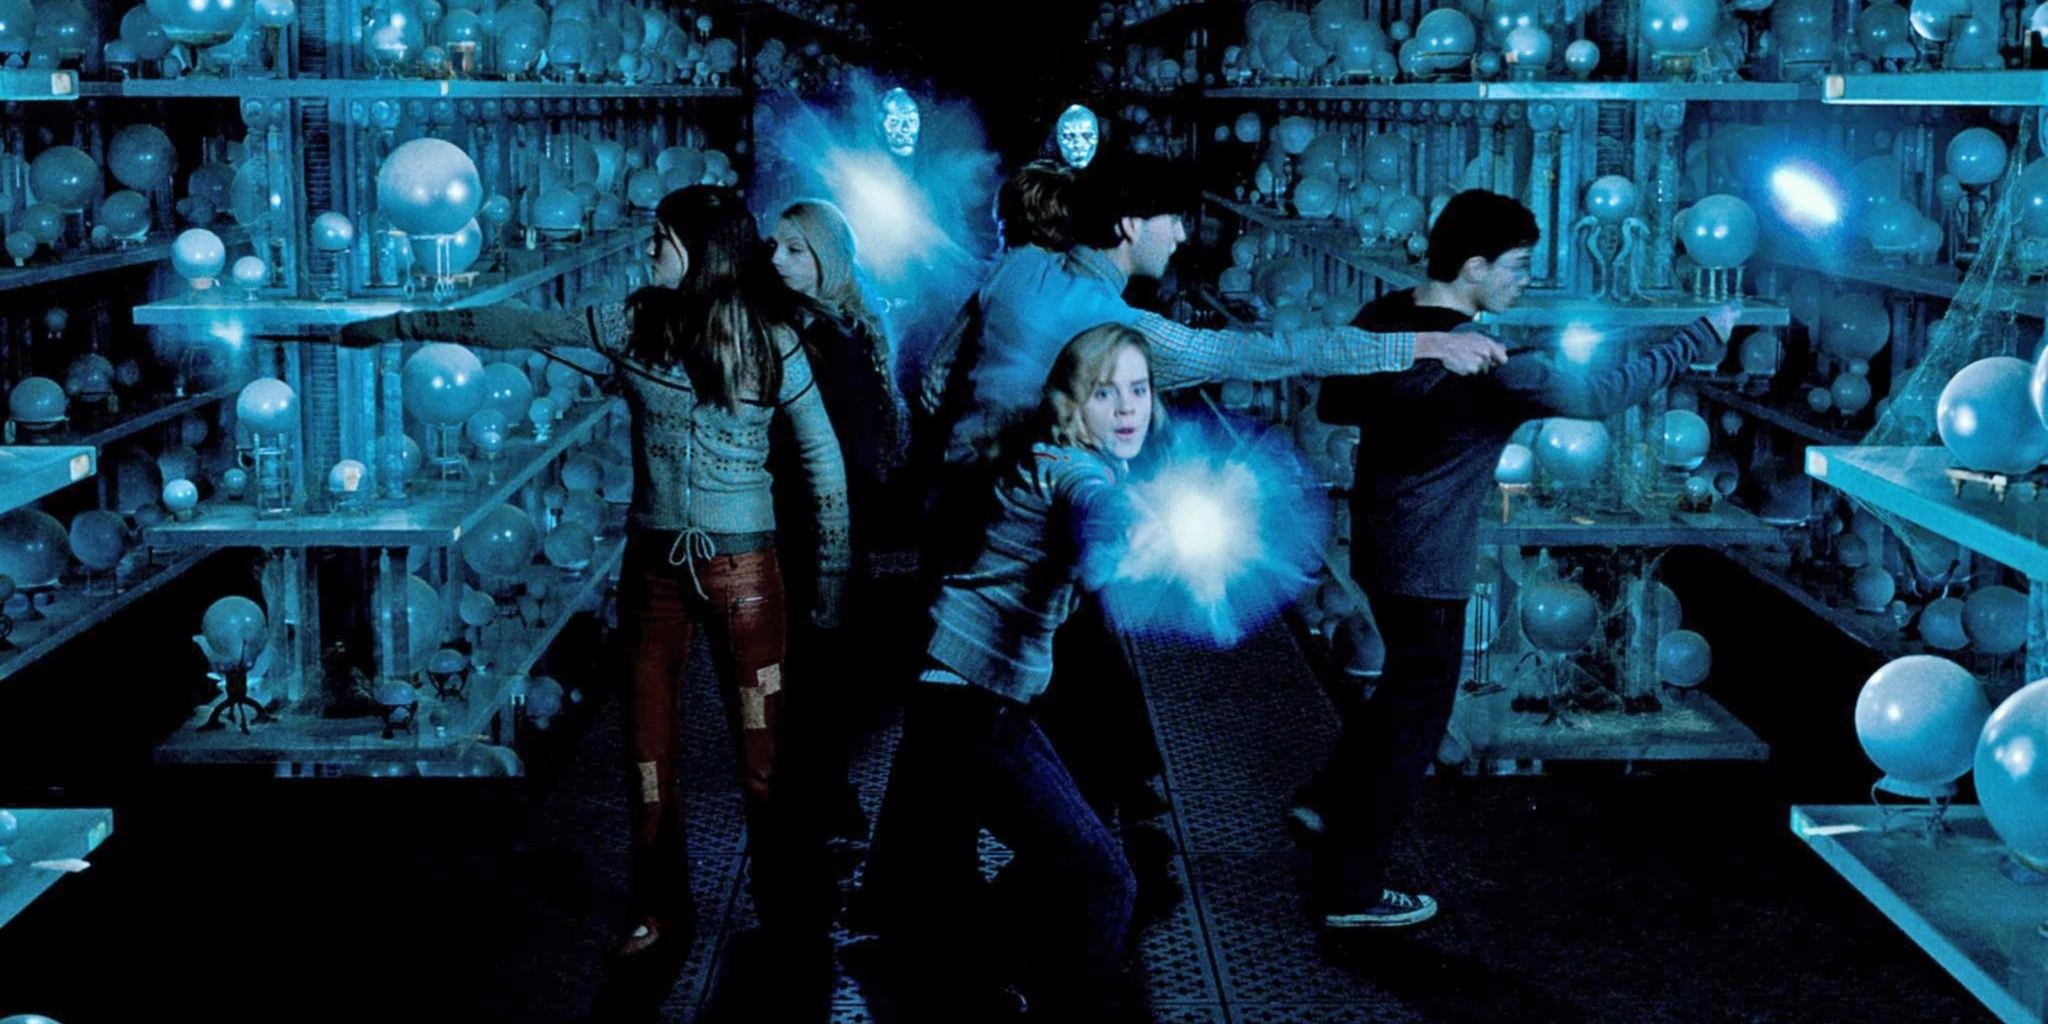 Hermione, Ginny, Harry, Neville, and Luna use Stupefy to expel Death Eaters in the Ministry of Magic's Department of Mysteries in Harry Potter and the Order of the Phoenix